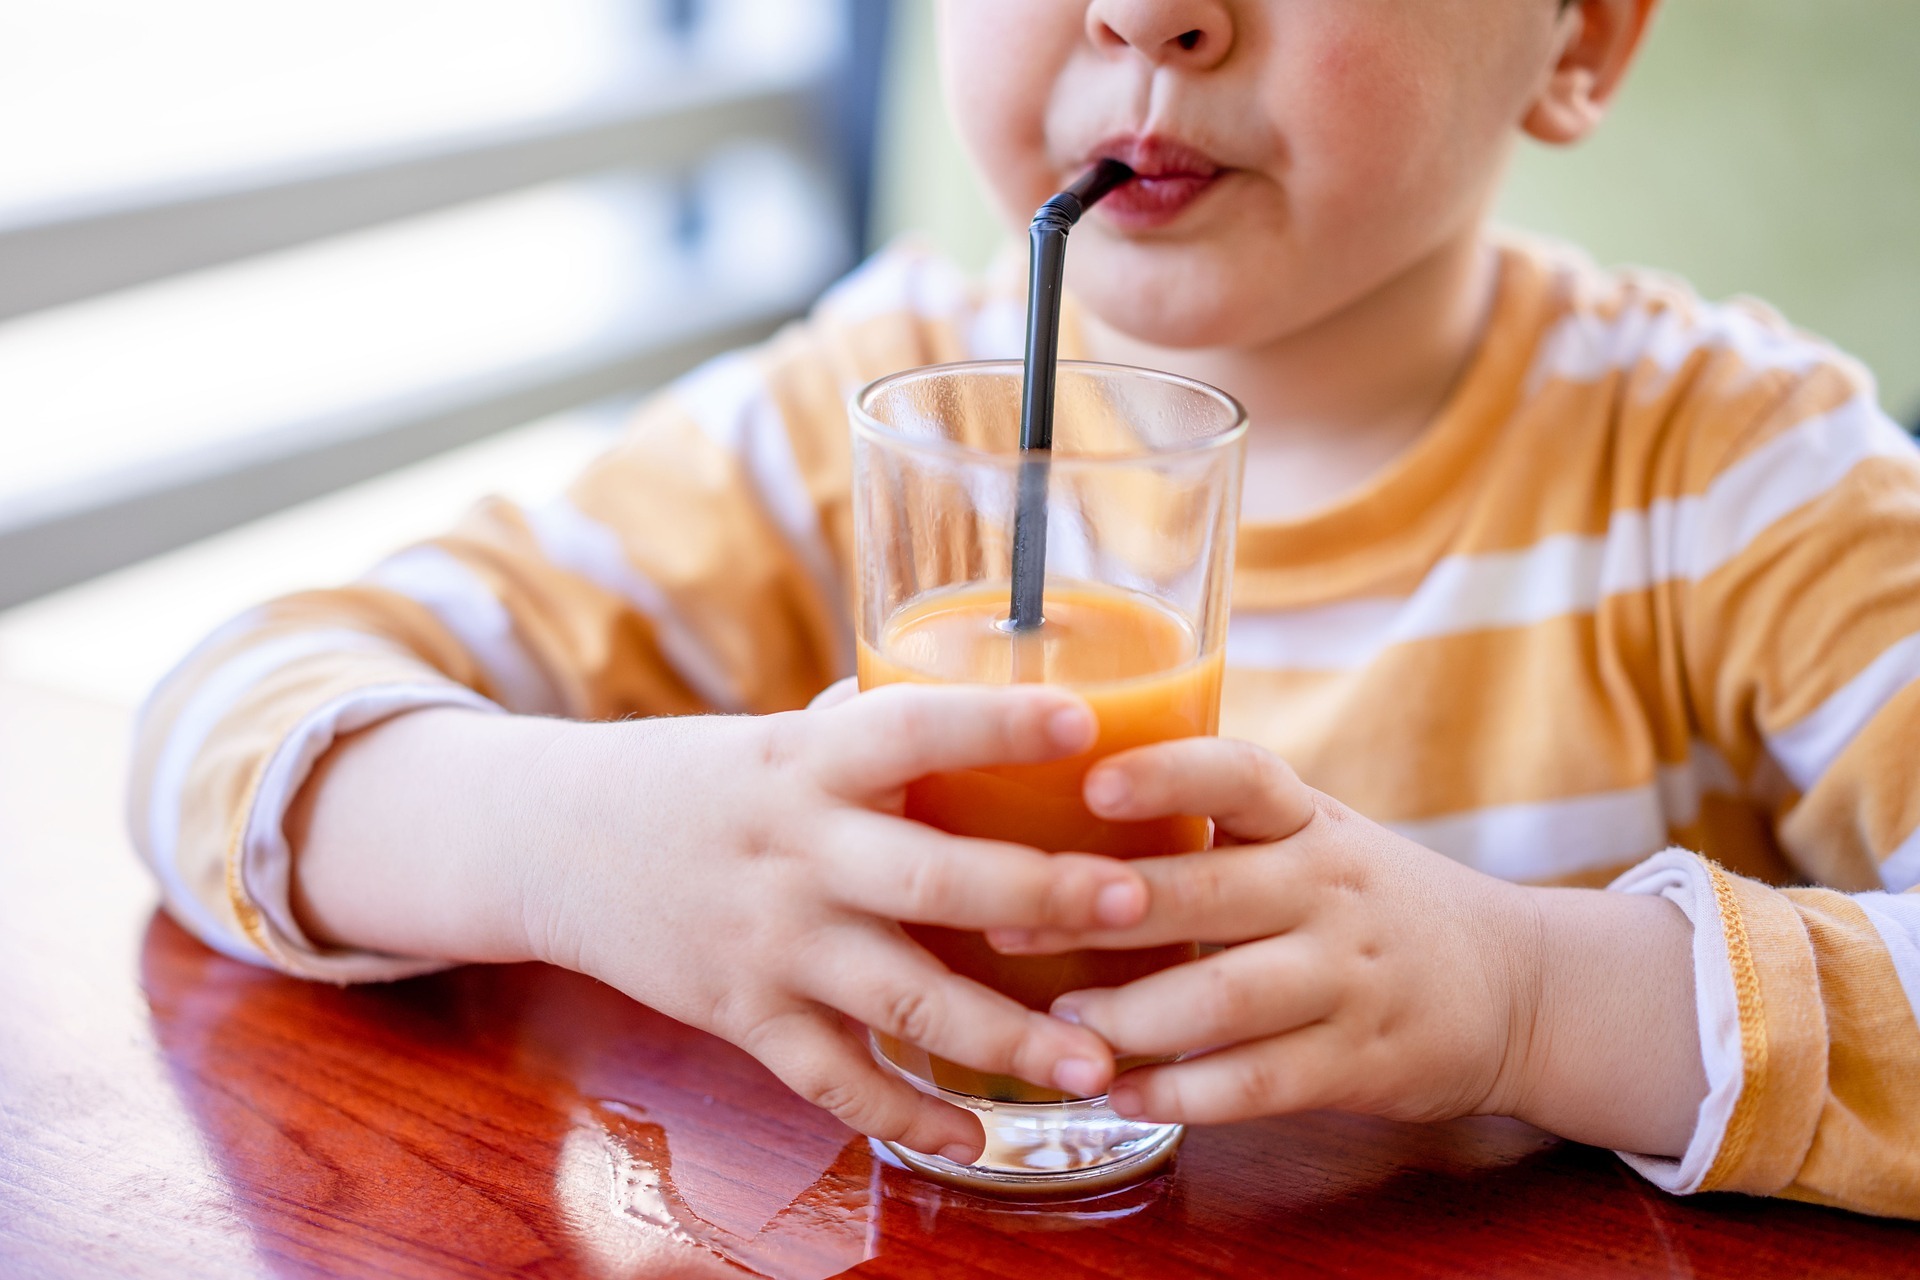 A child drinking a juice